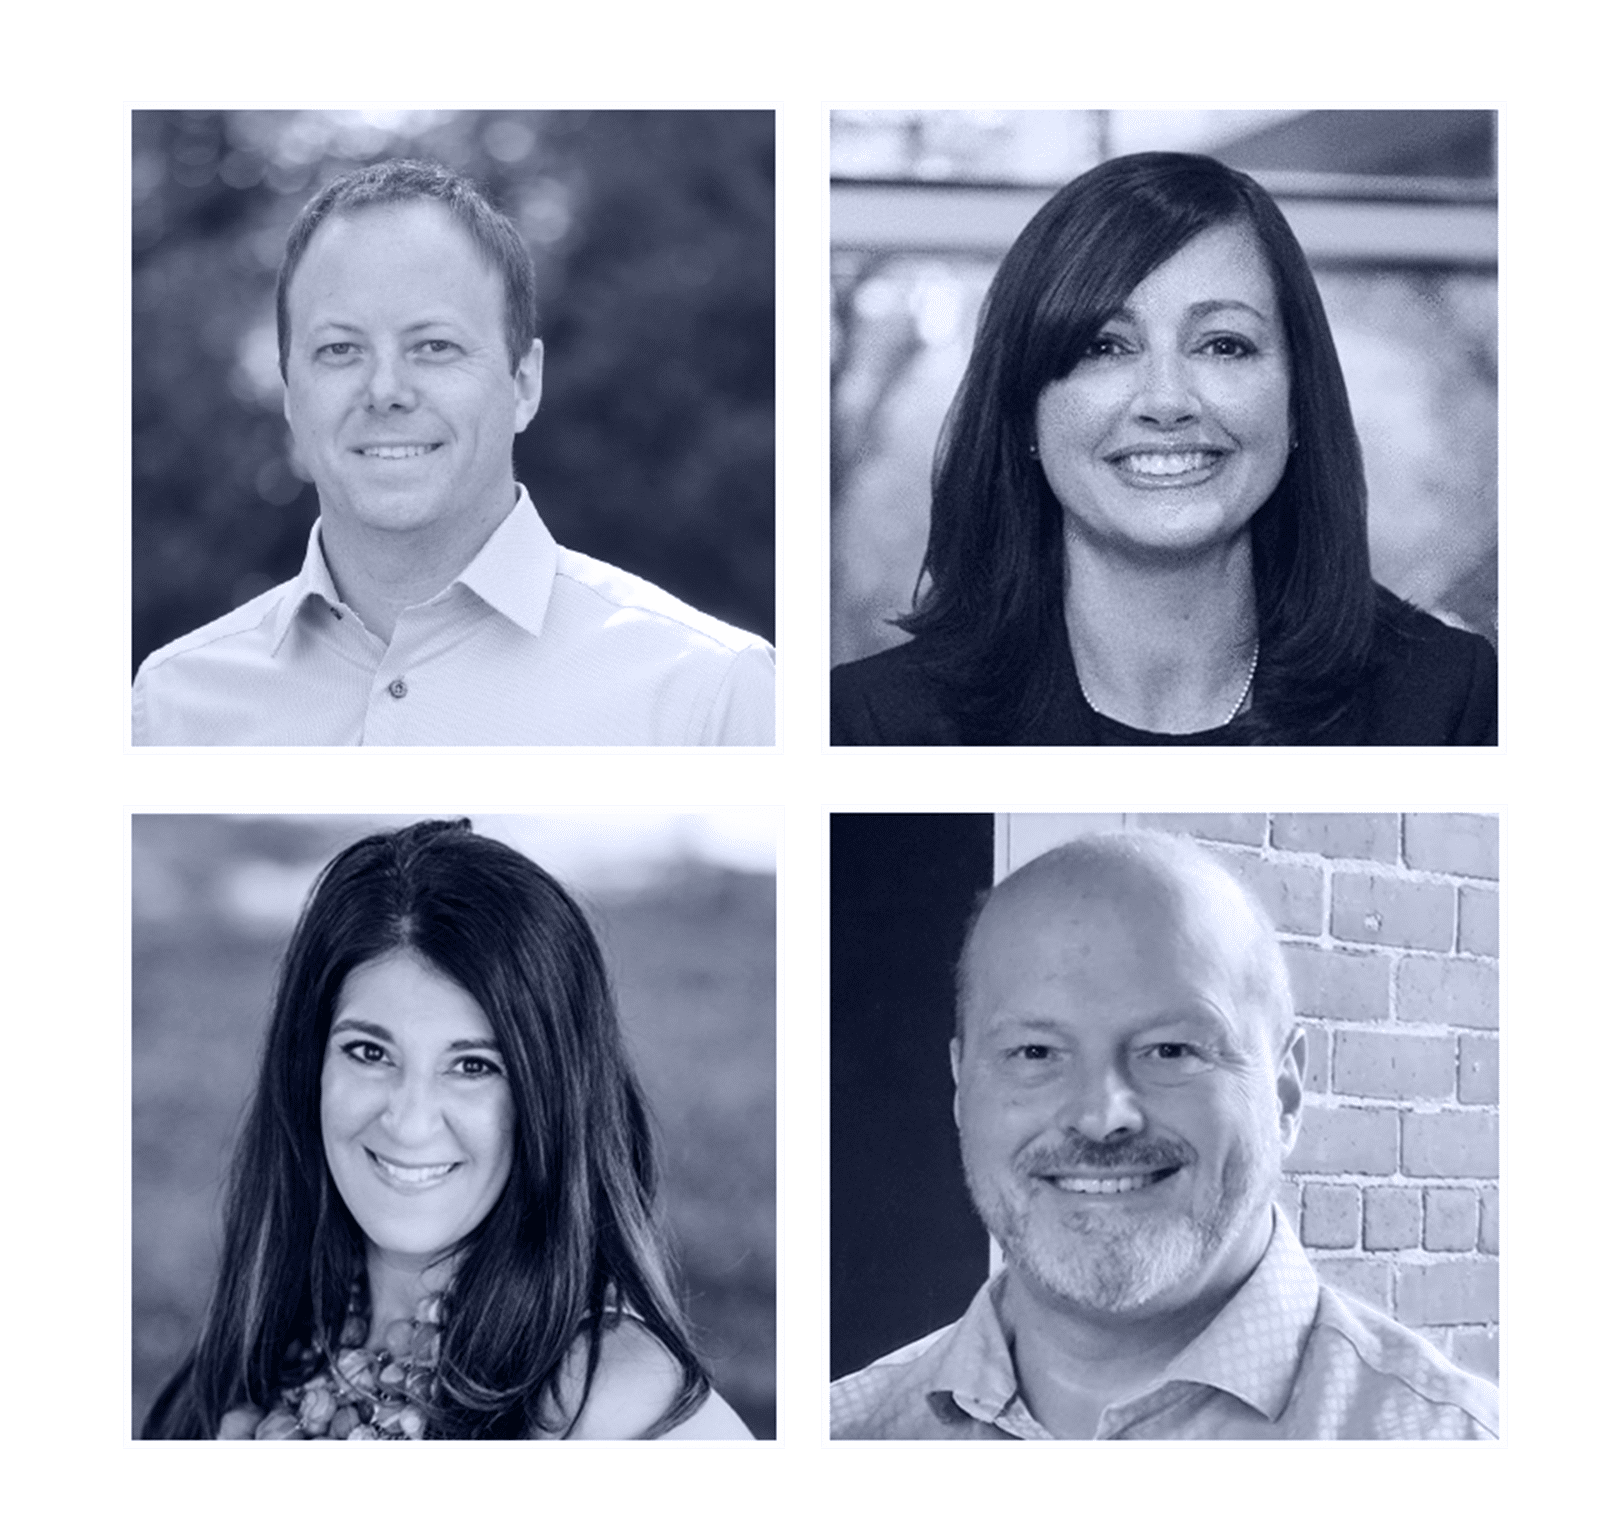 Meet the experts in CLM at Ntracts; David, Stephanie, Sarah, Glenn